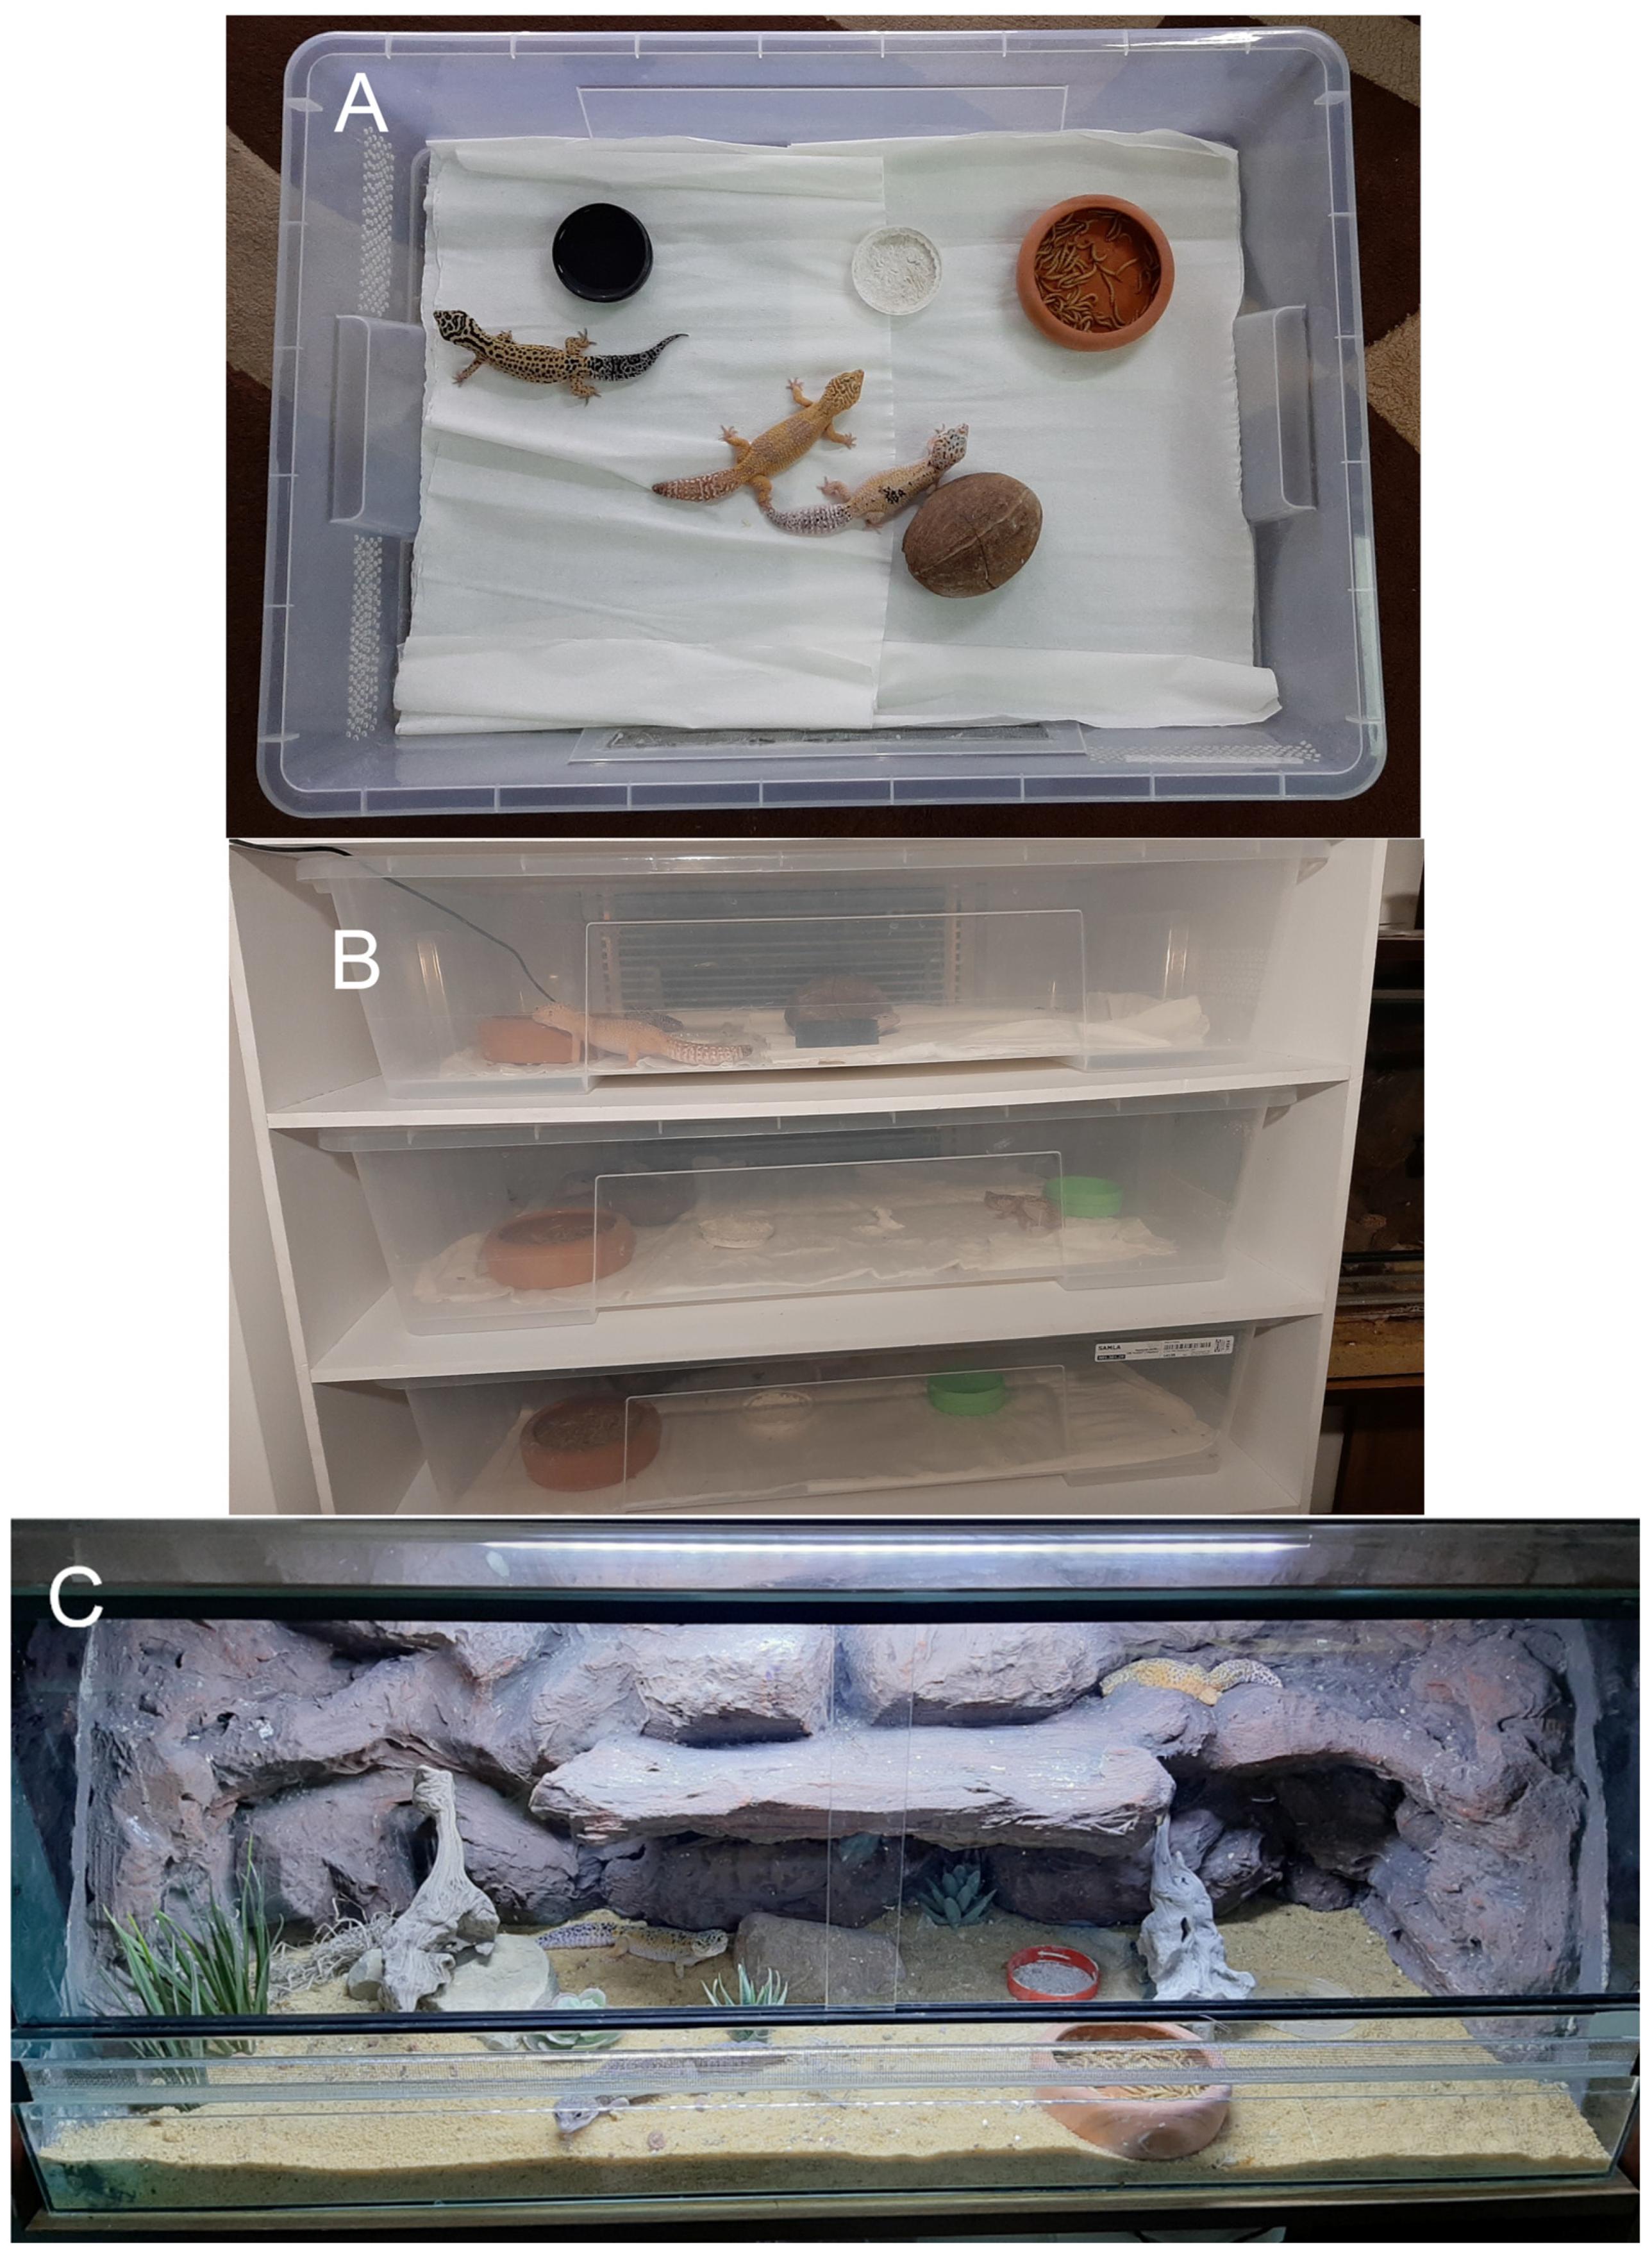 Animals | Free Full-Text | The Effect of Enrichment on Leopard Geckos  (Eublepharis macularius) Housed in Two Different Maintenance Systems (Rack  System vs. Terrarium)